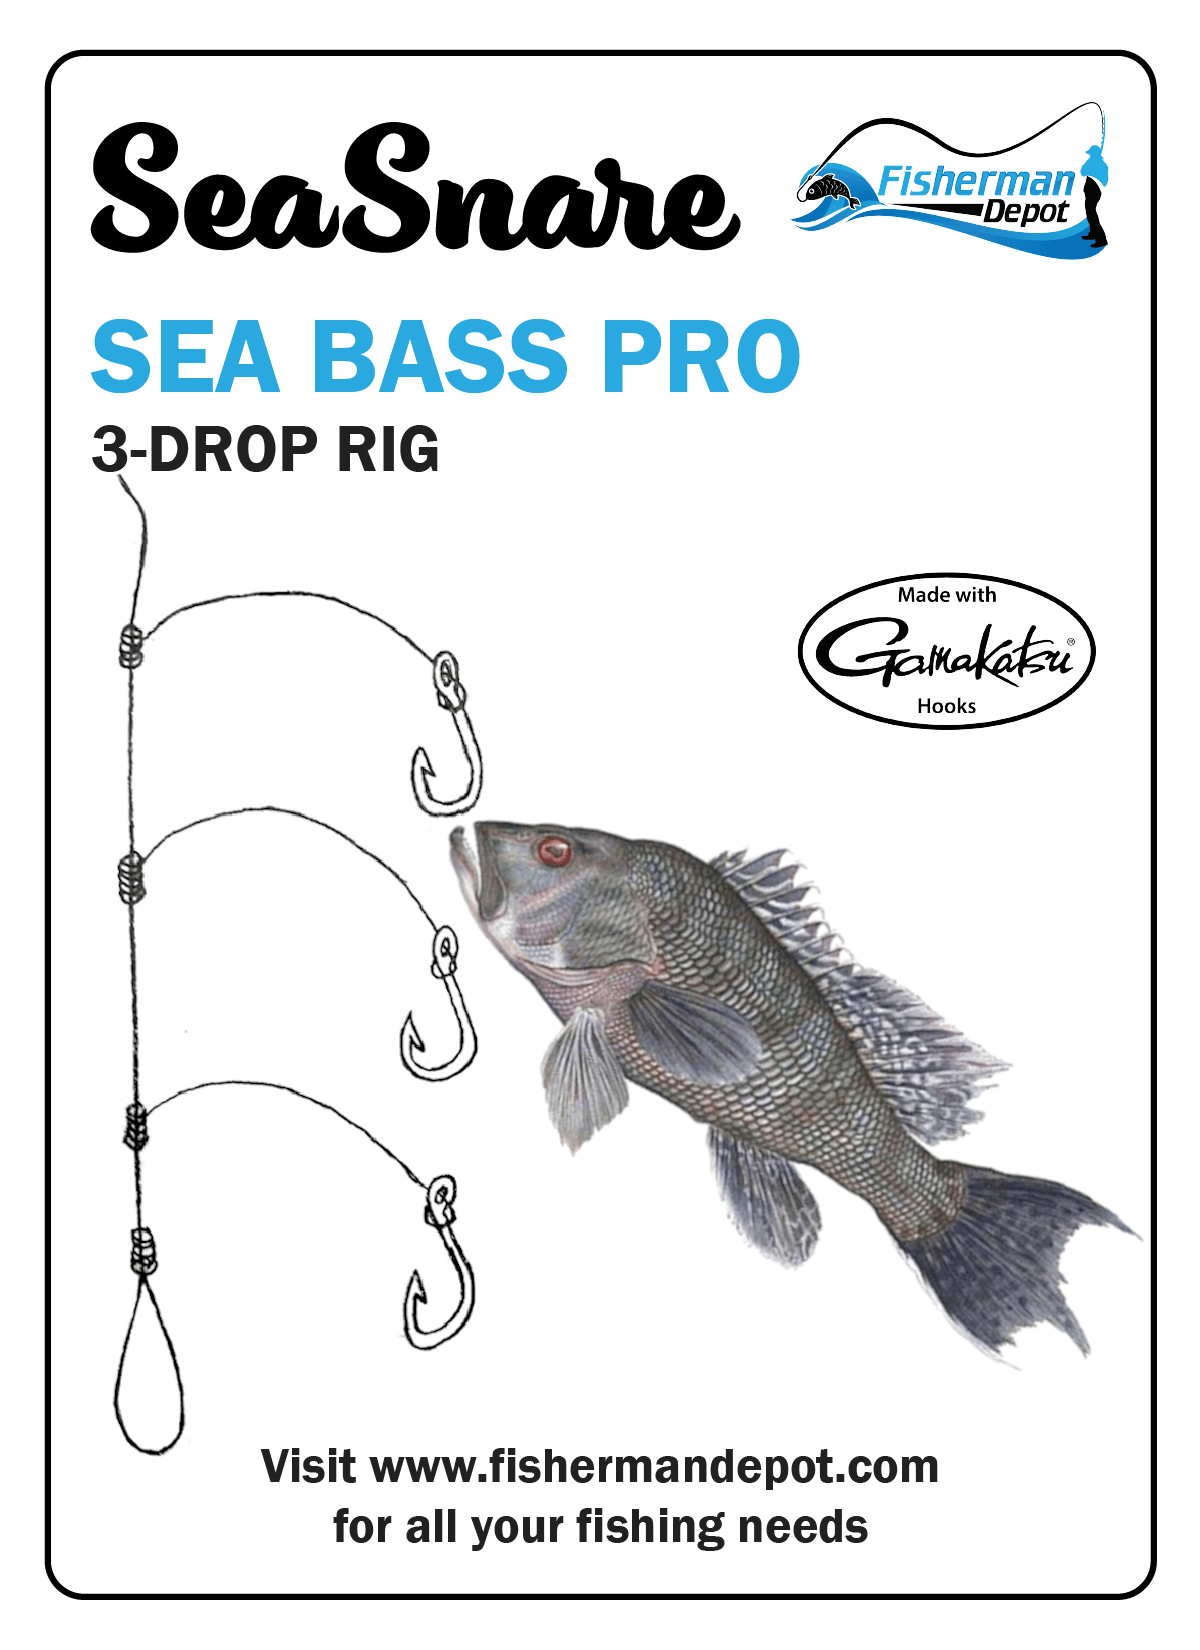 PORGY SCUP RIG BEADED 2 HOOK TINNED O'SHAUGHNESSY SALTWATER BOTTOM